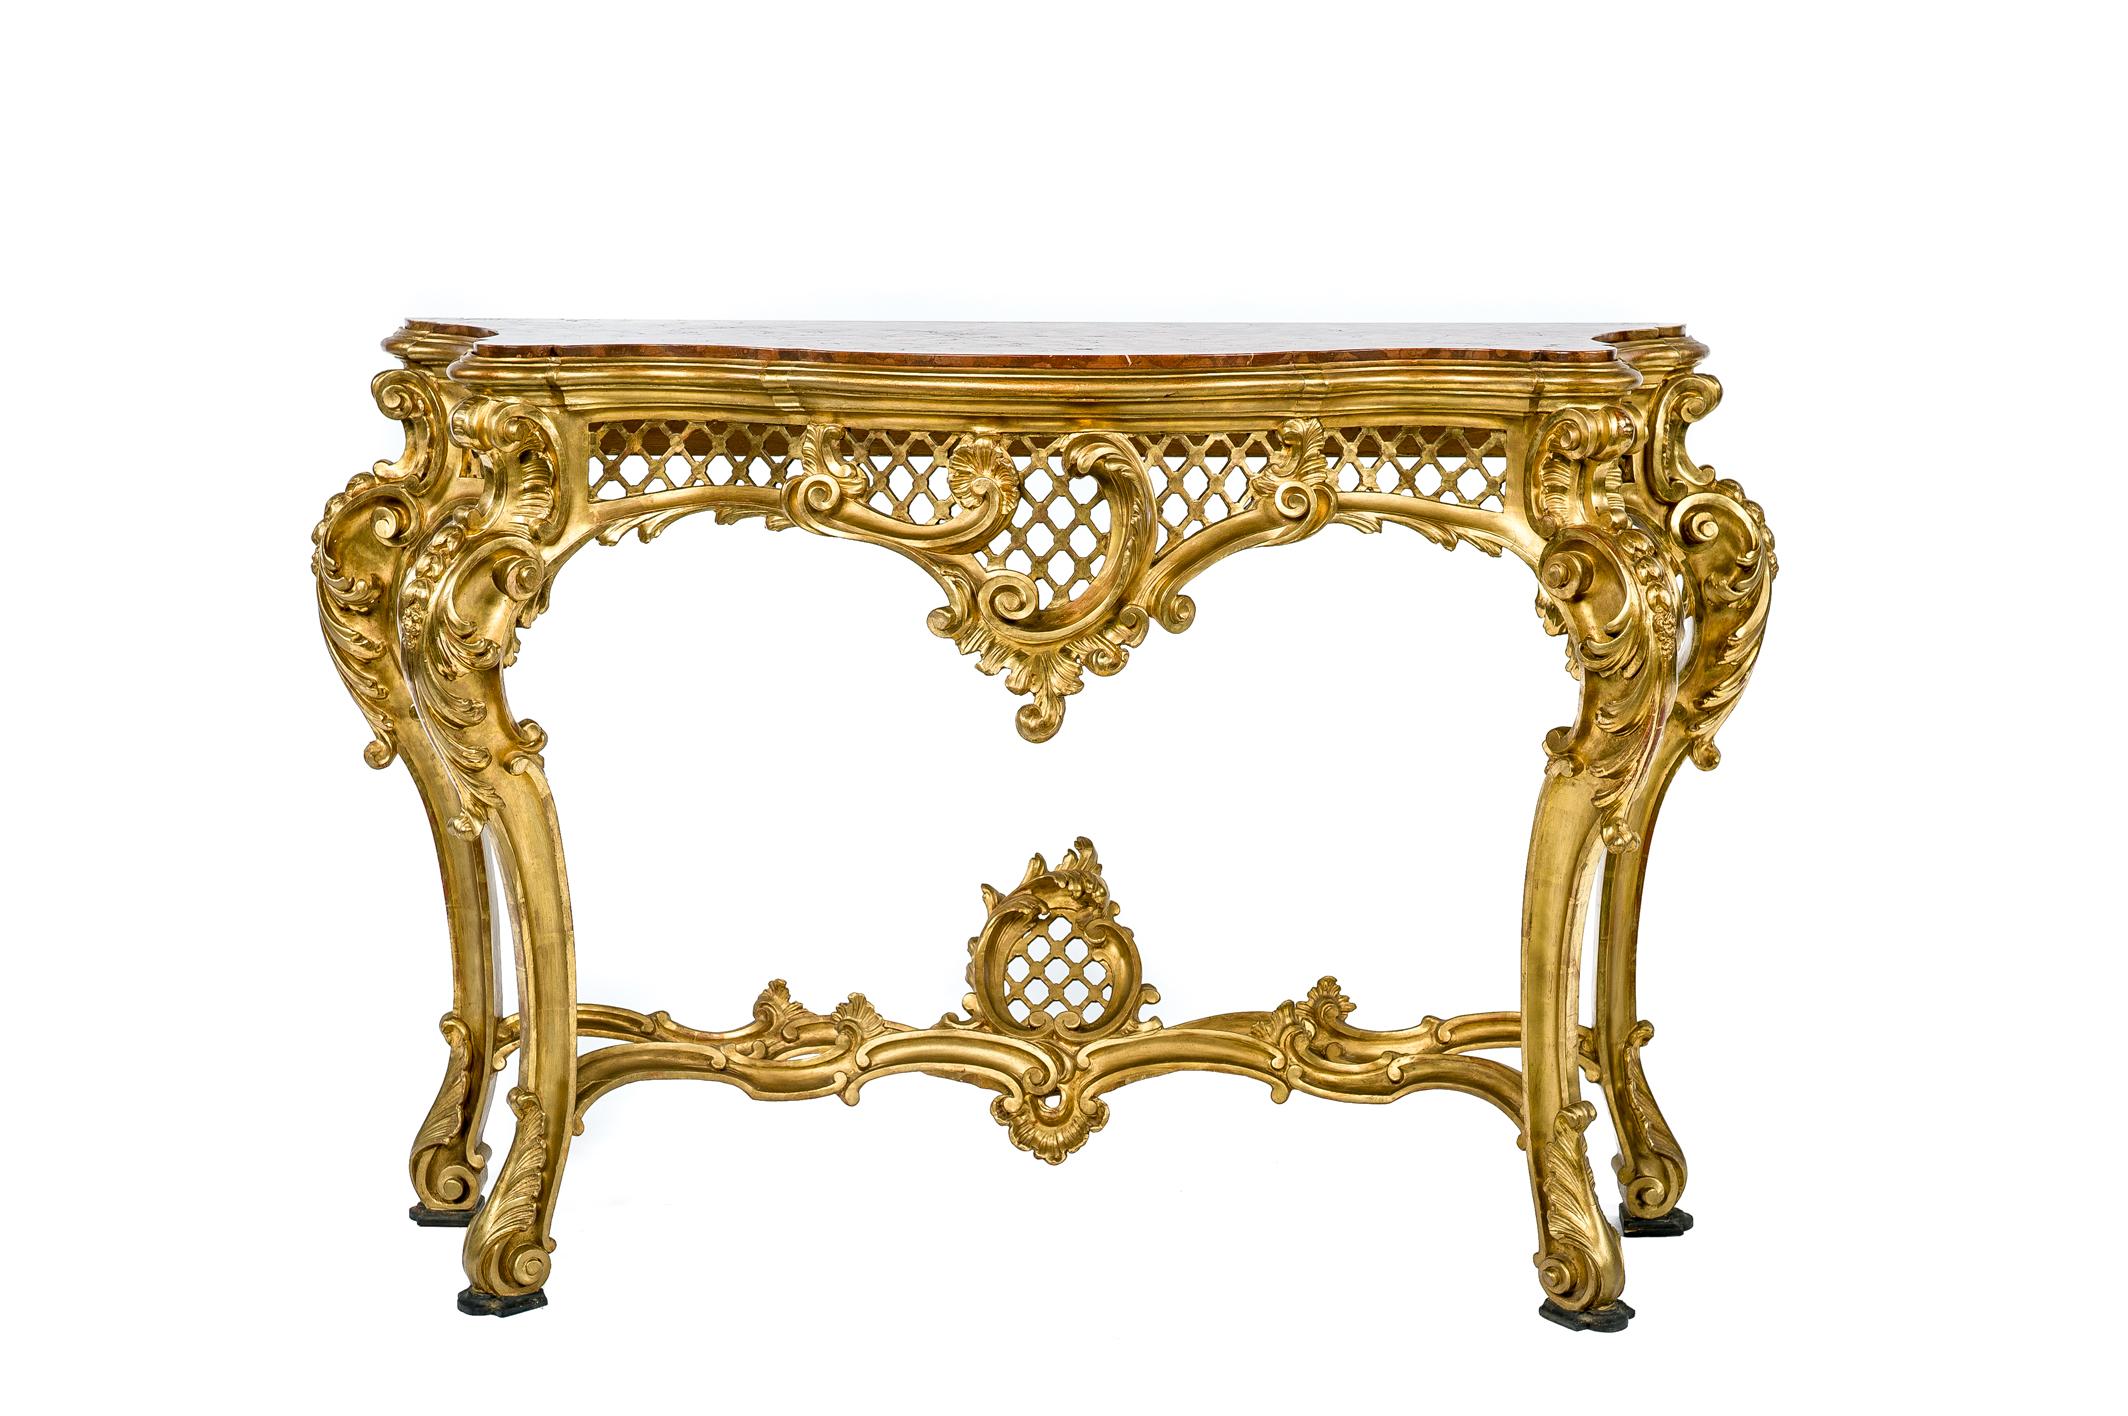 Beautiful Italian Rococo console table with inserted top of rosso verona marble. 
This console table has a pierced skirt centered by a rococo foliate ornament with complex volute floral and foliate carved cabriole legs. The legs are jointed by